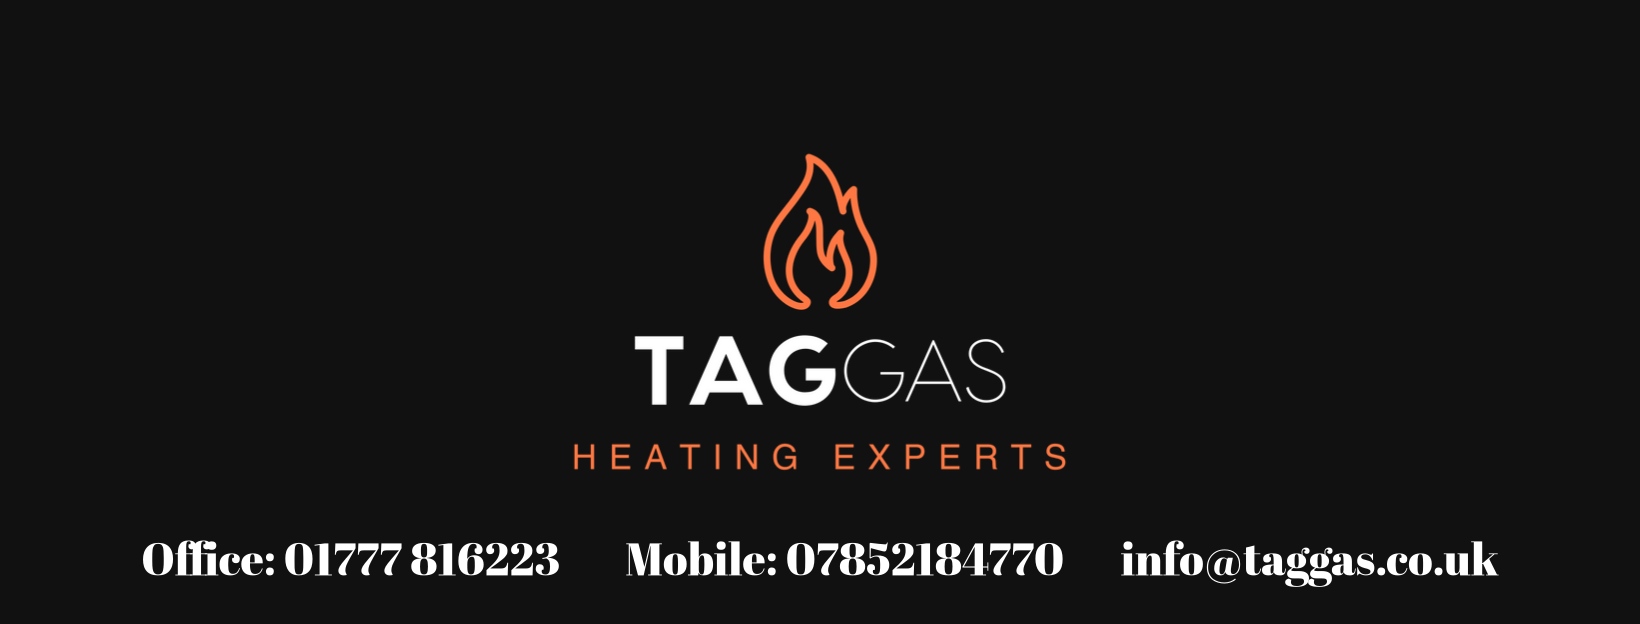 Taggas electrical pre walk around